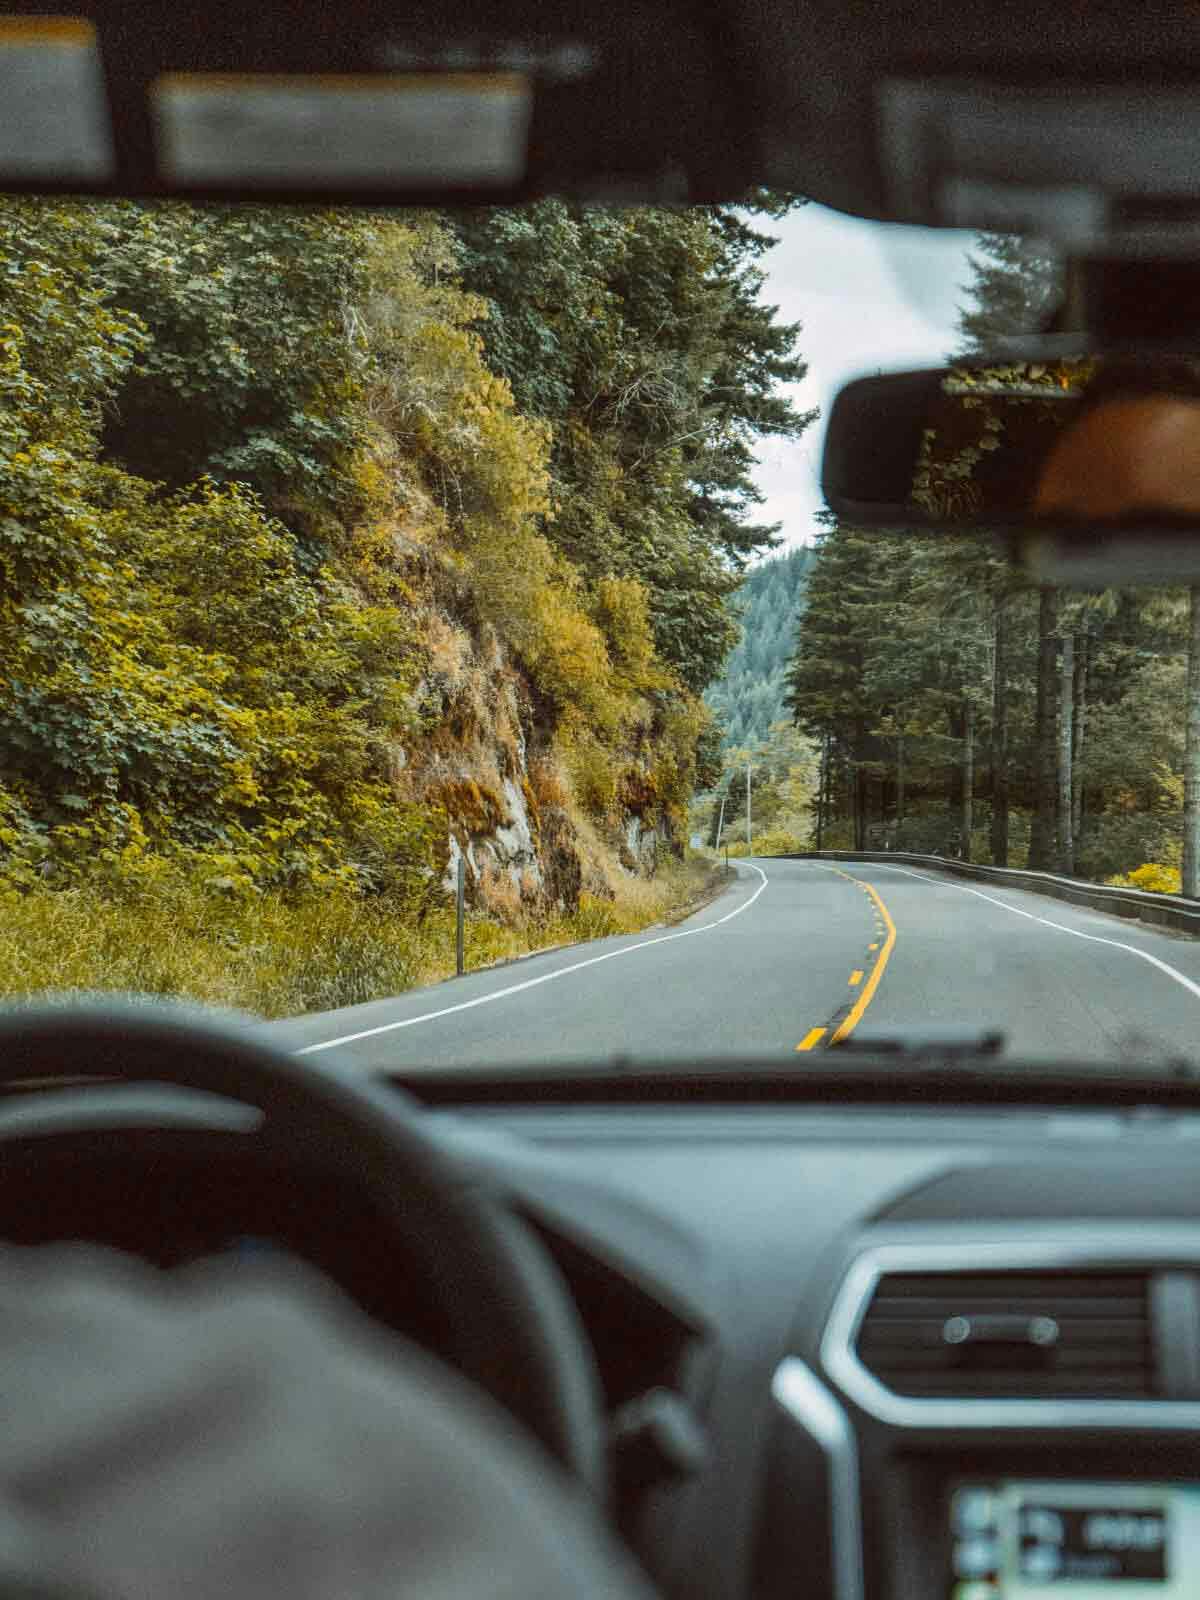 Driver's seat view on a forest road